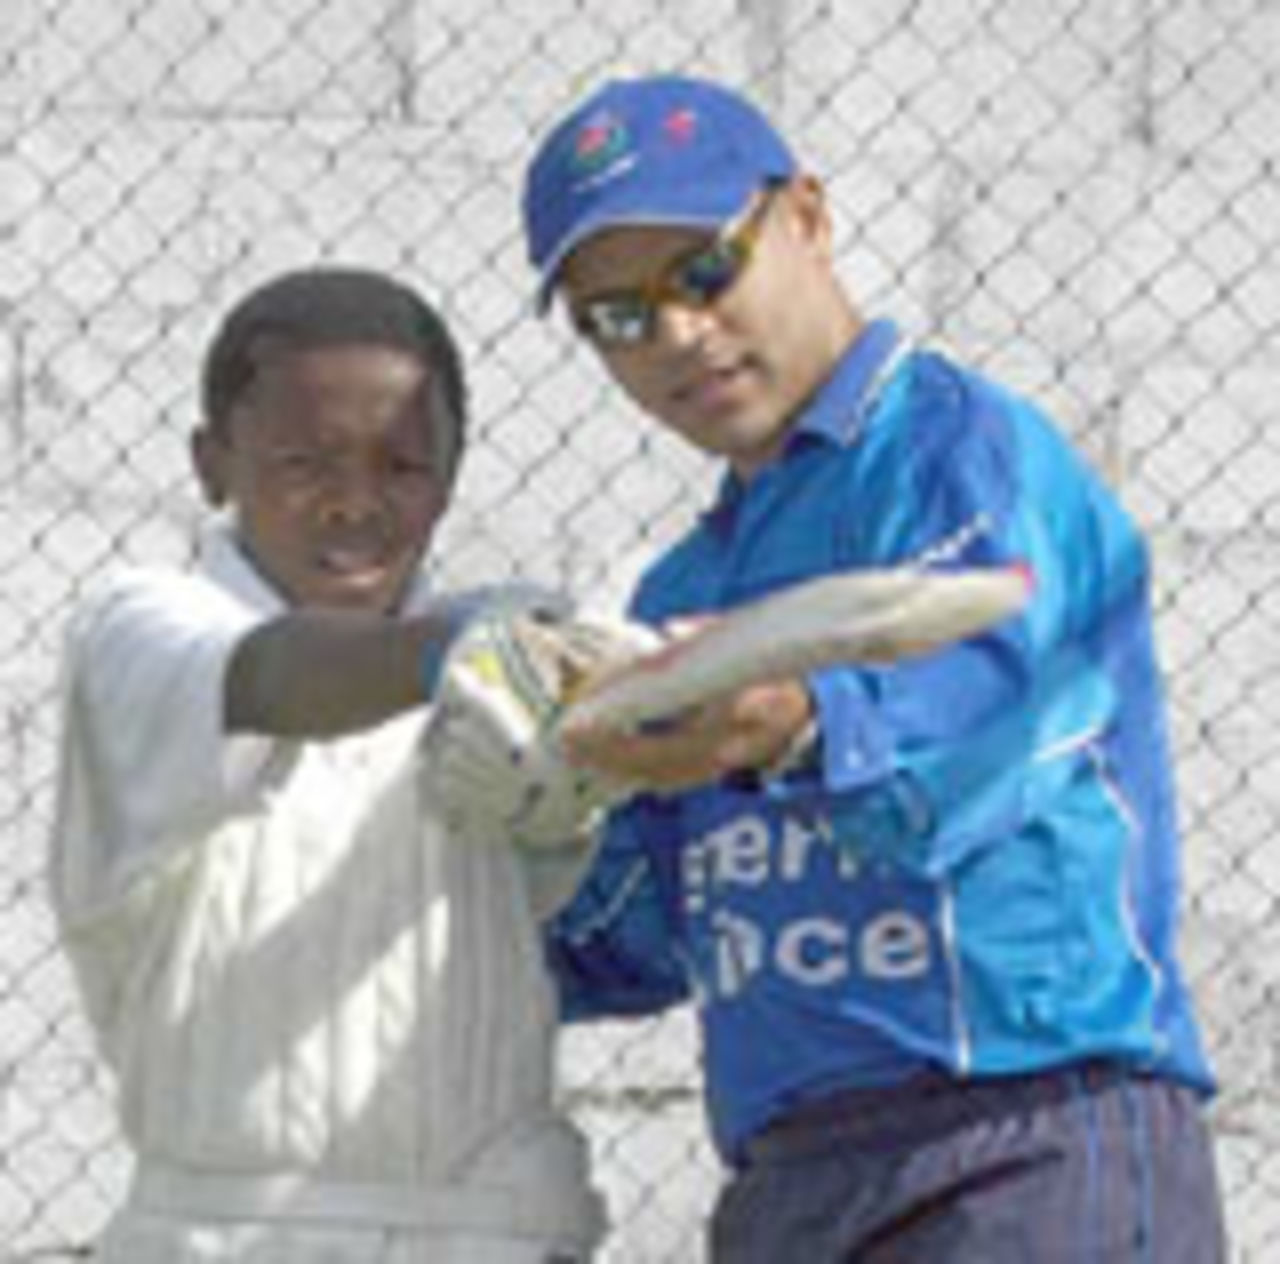 WP captain Ashwell Prince shows a young Gugulethu player how to hook